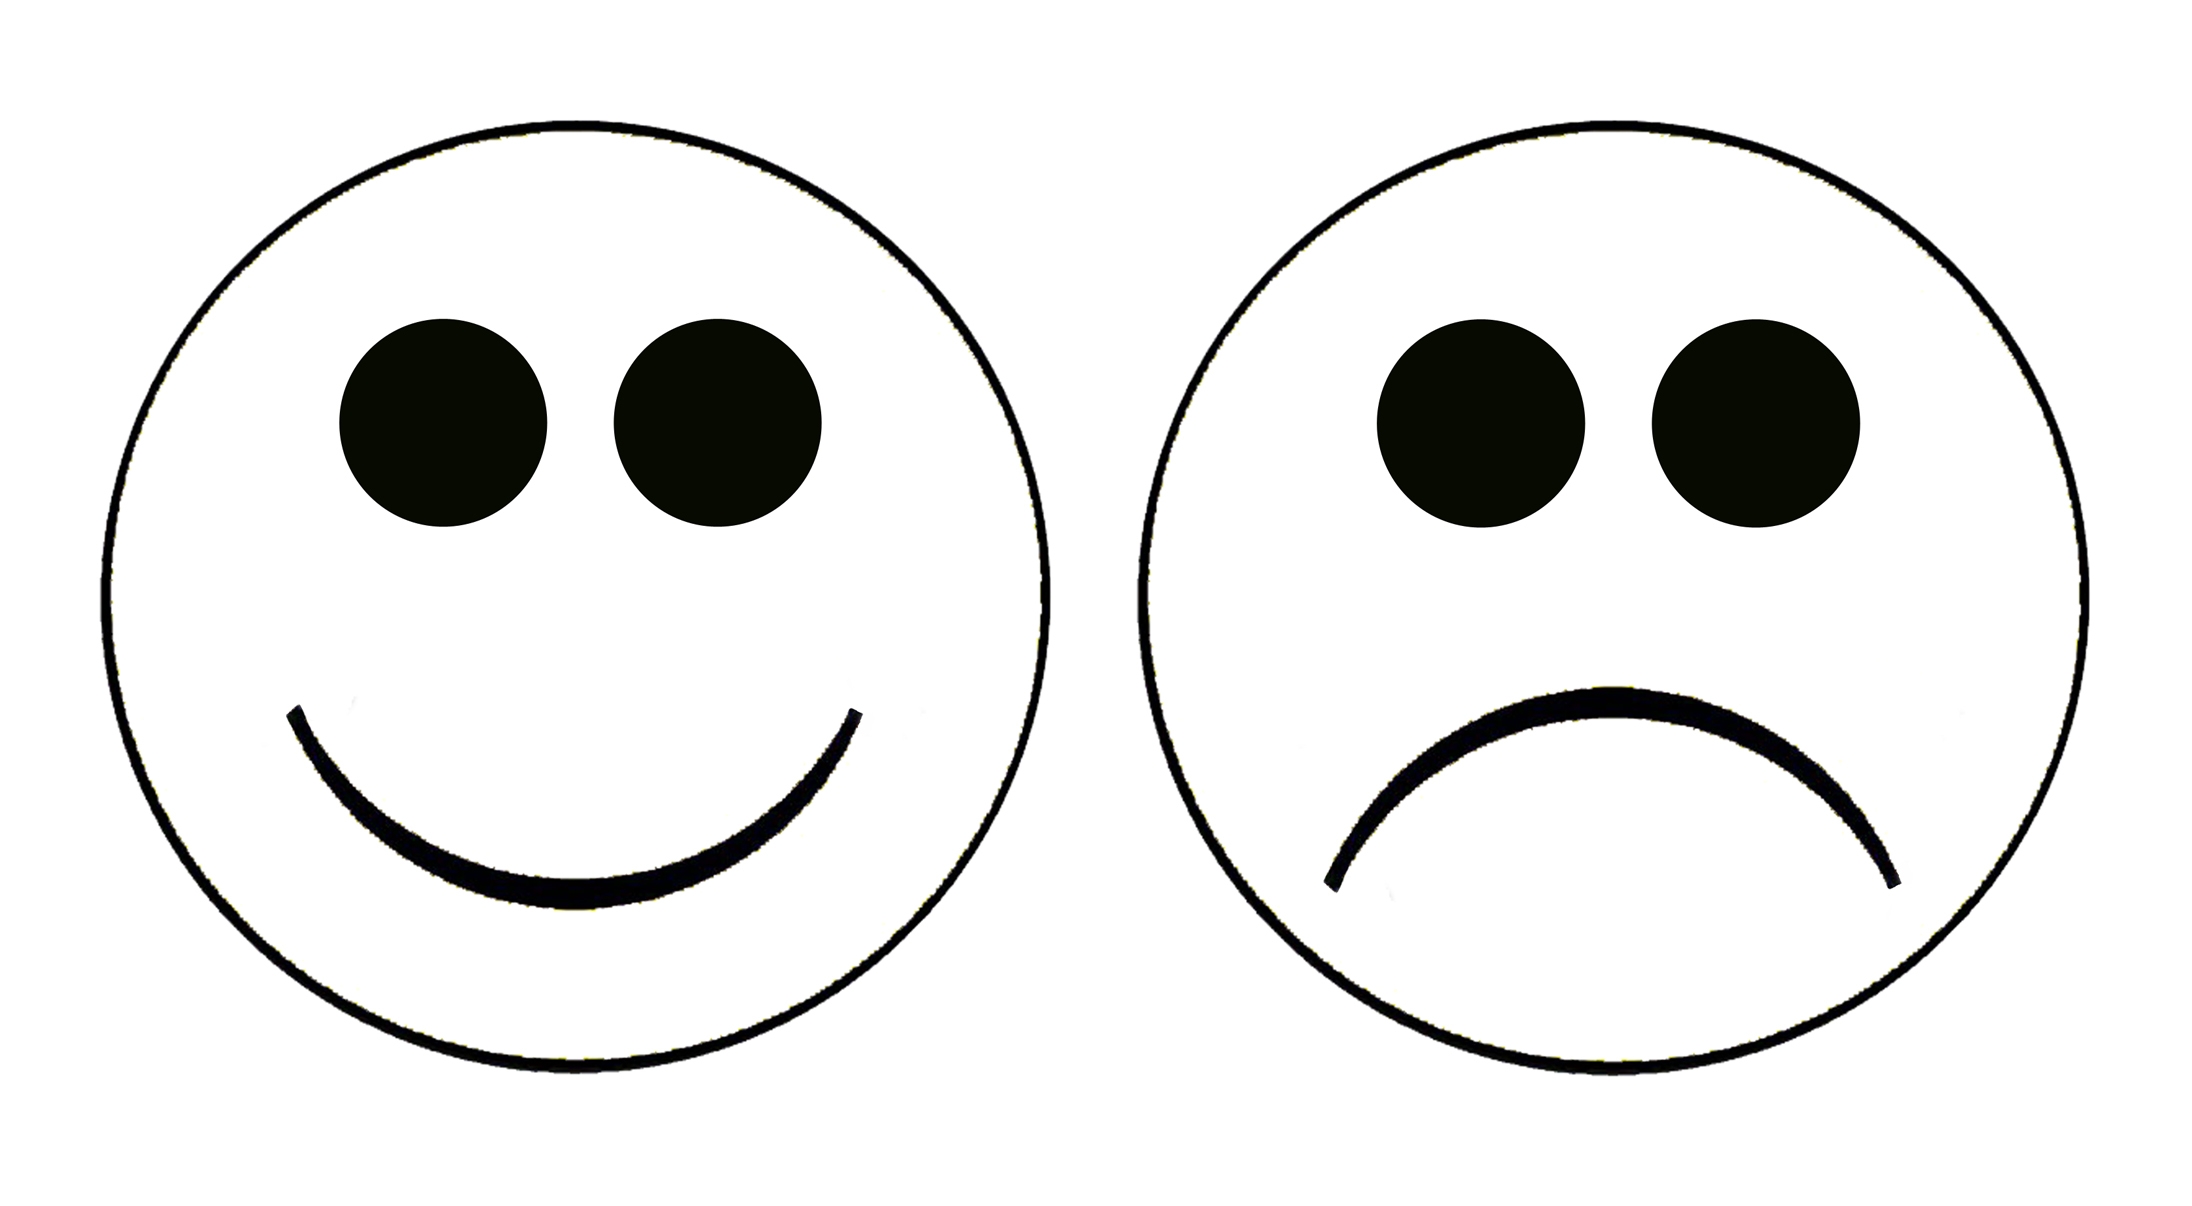 Sad face star clipart black and white